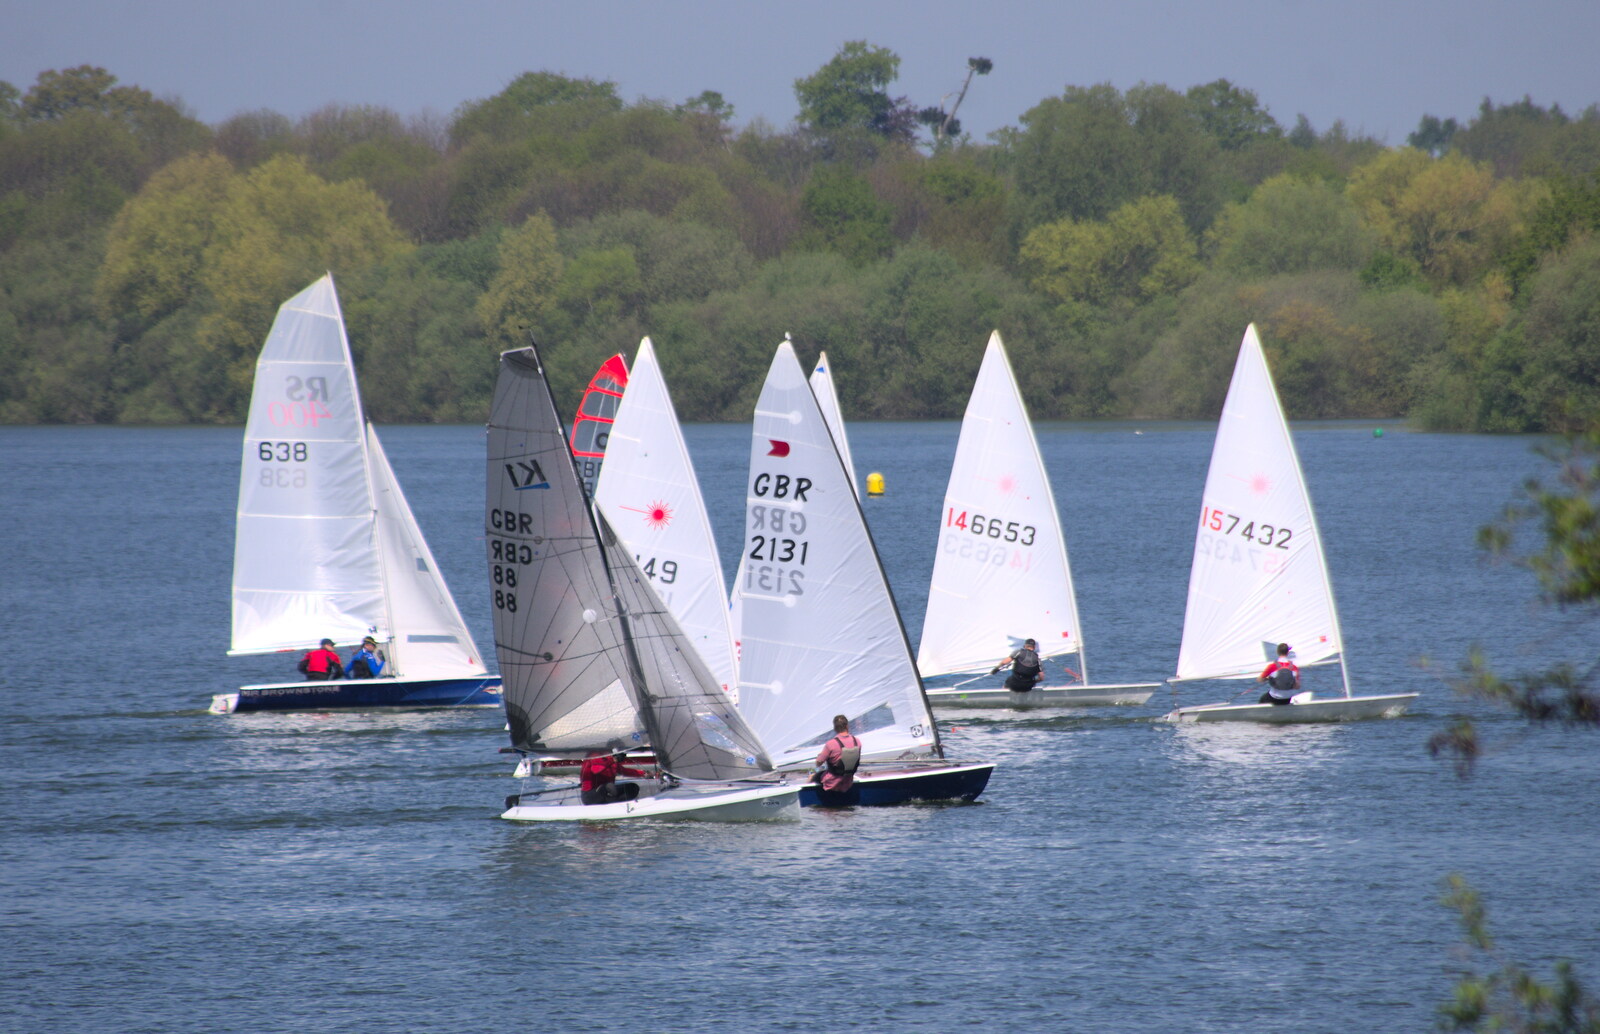 A bunch of Laser dinghies race around from Isobel's 10km Run, Alton Water, Stutton, Suffolk - 6th May 2018